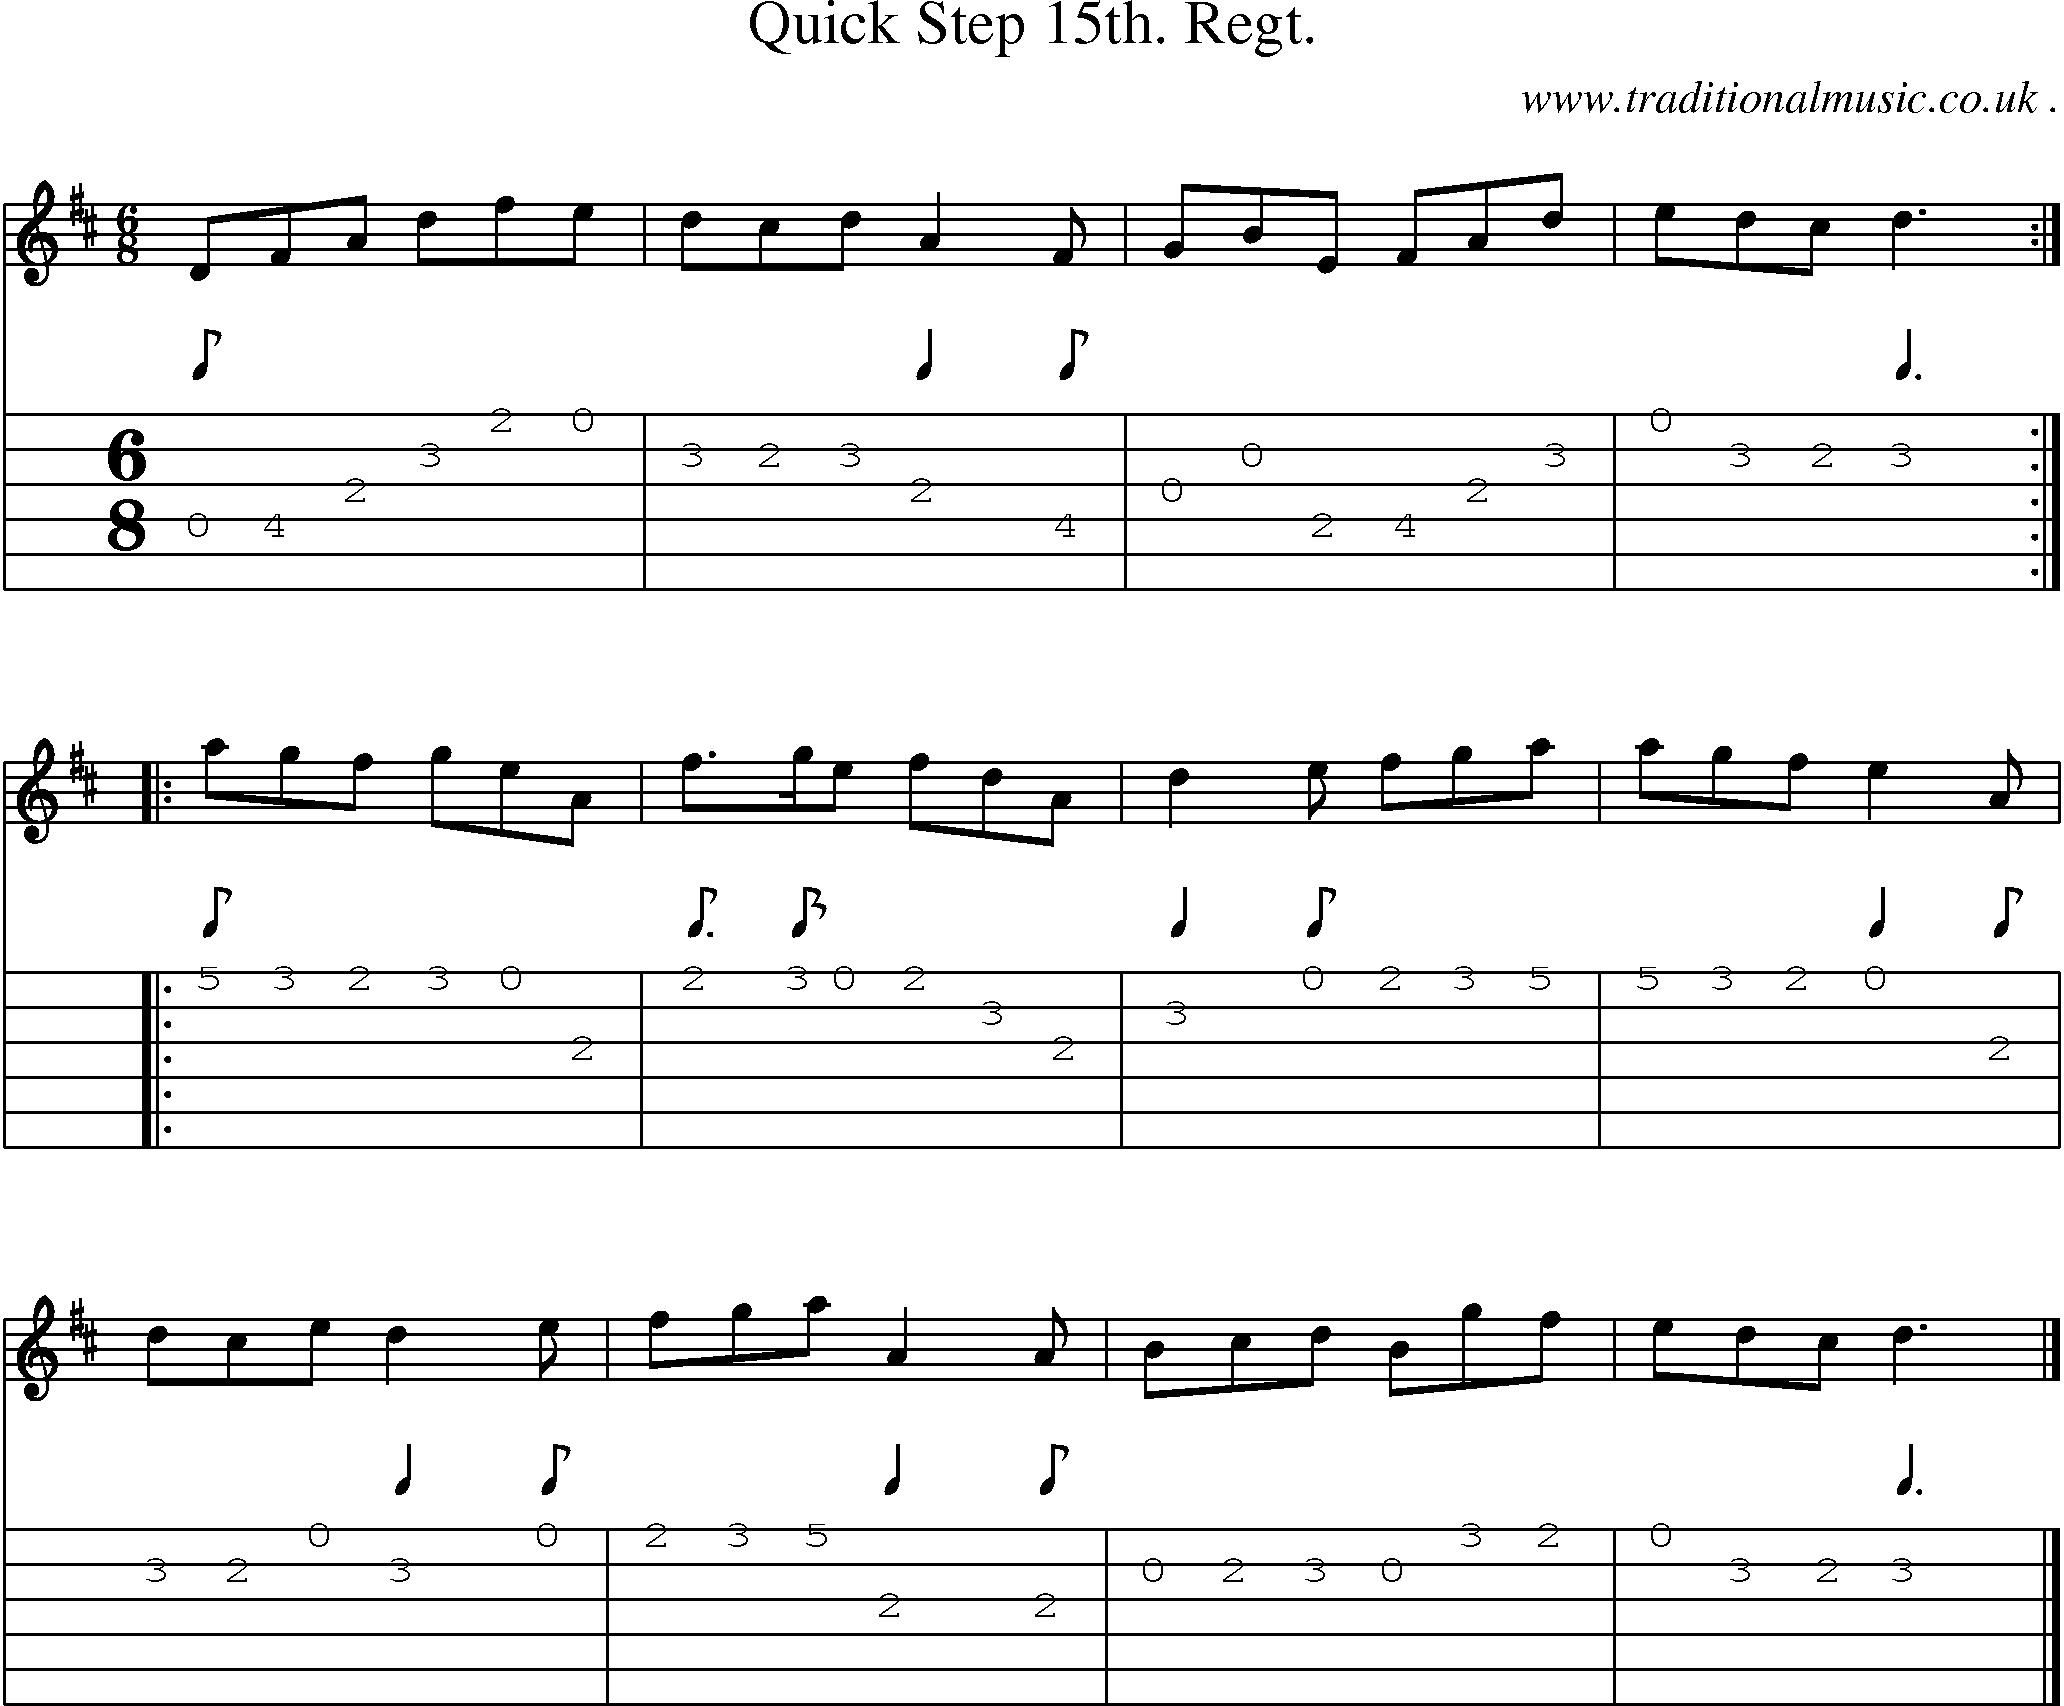 Sheet-music  score, Chords and Guitar Tabs for Quick Step 15th Regt